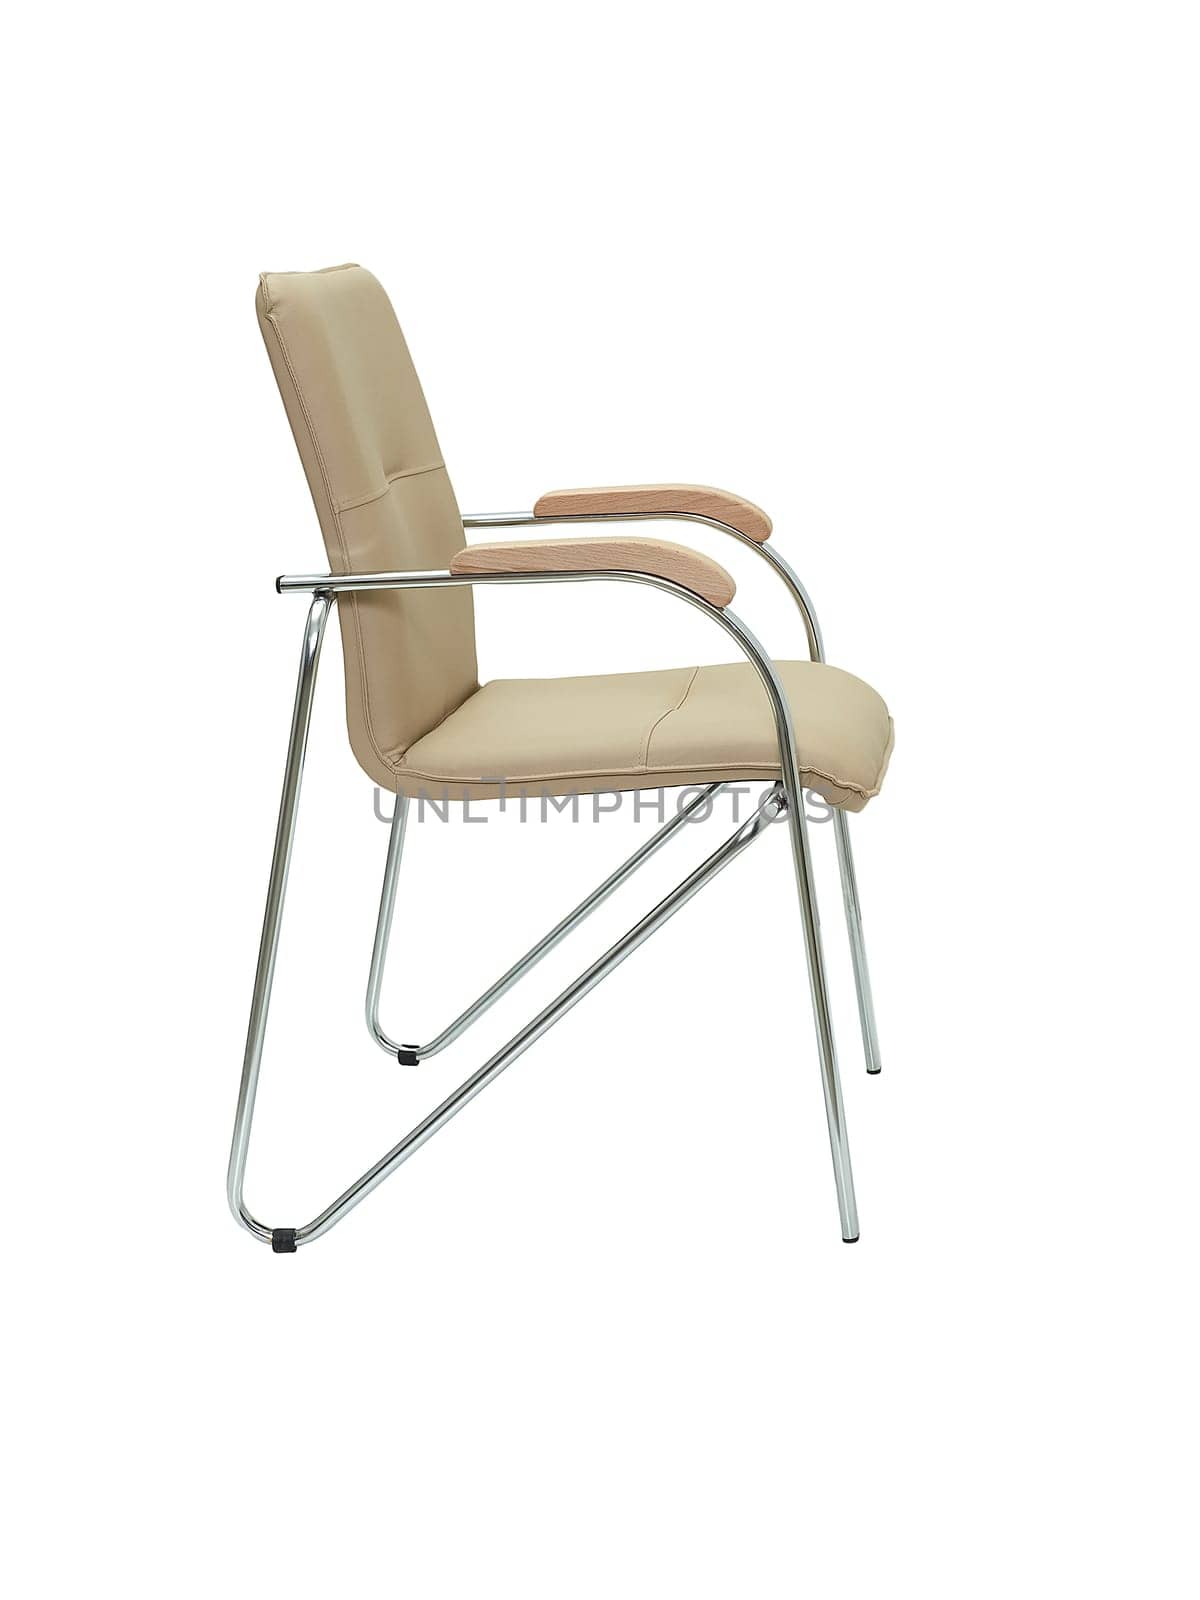 beige leather office chair with chrome legs and elbow in strict style isolated on white background, side view. contemporary furniture in minimal style, interior, home design